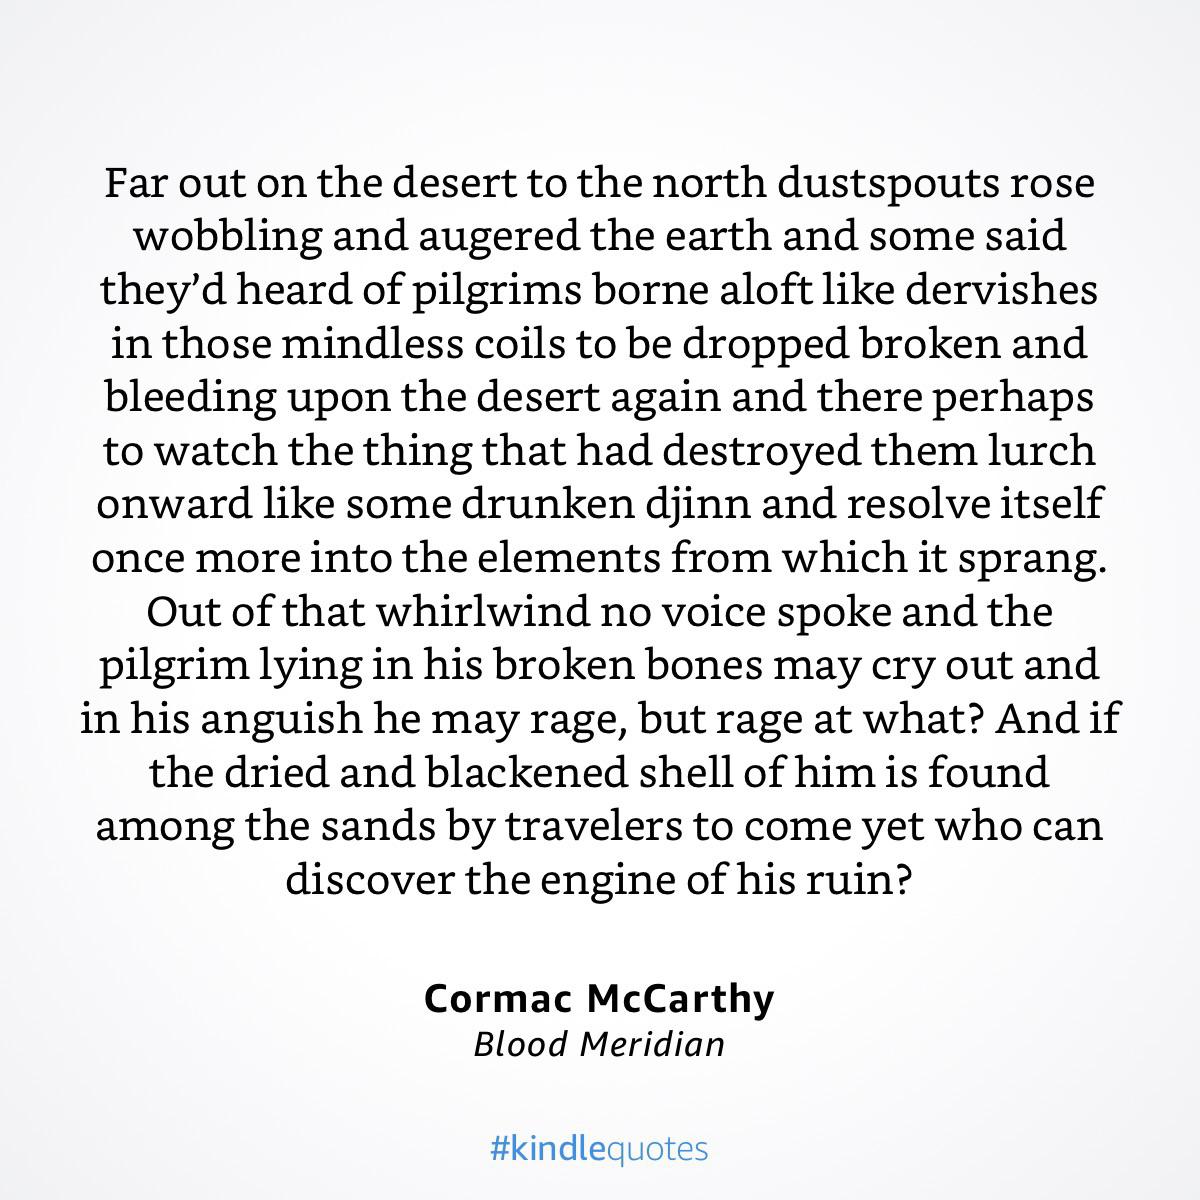 Sad to hear Cormac McCarthy has died at 89. What made McCarthy such an evocative writer was the commitment of his vision to his subject. I recommend his earlier work such as Suttree or Blood Meridian although neophytes may rather start w/ his Border Trilogy. #RIPCormacMcCarthy